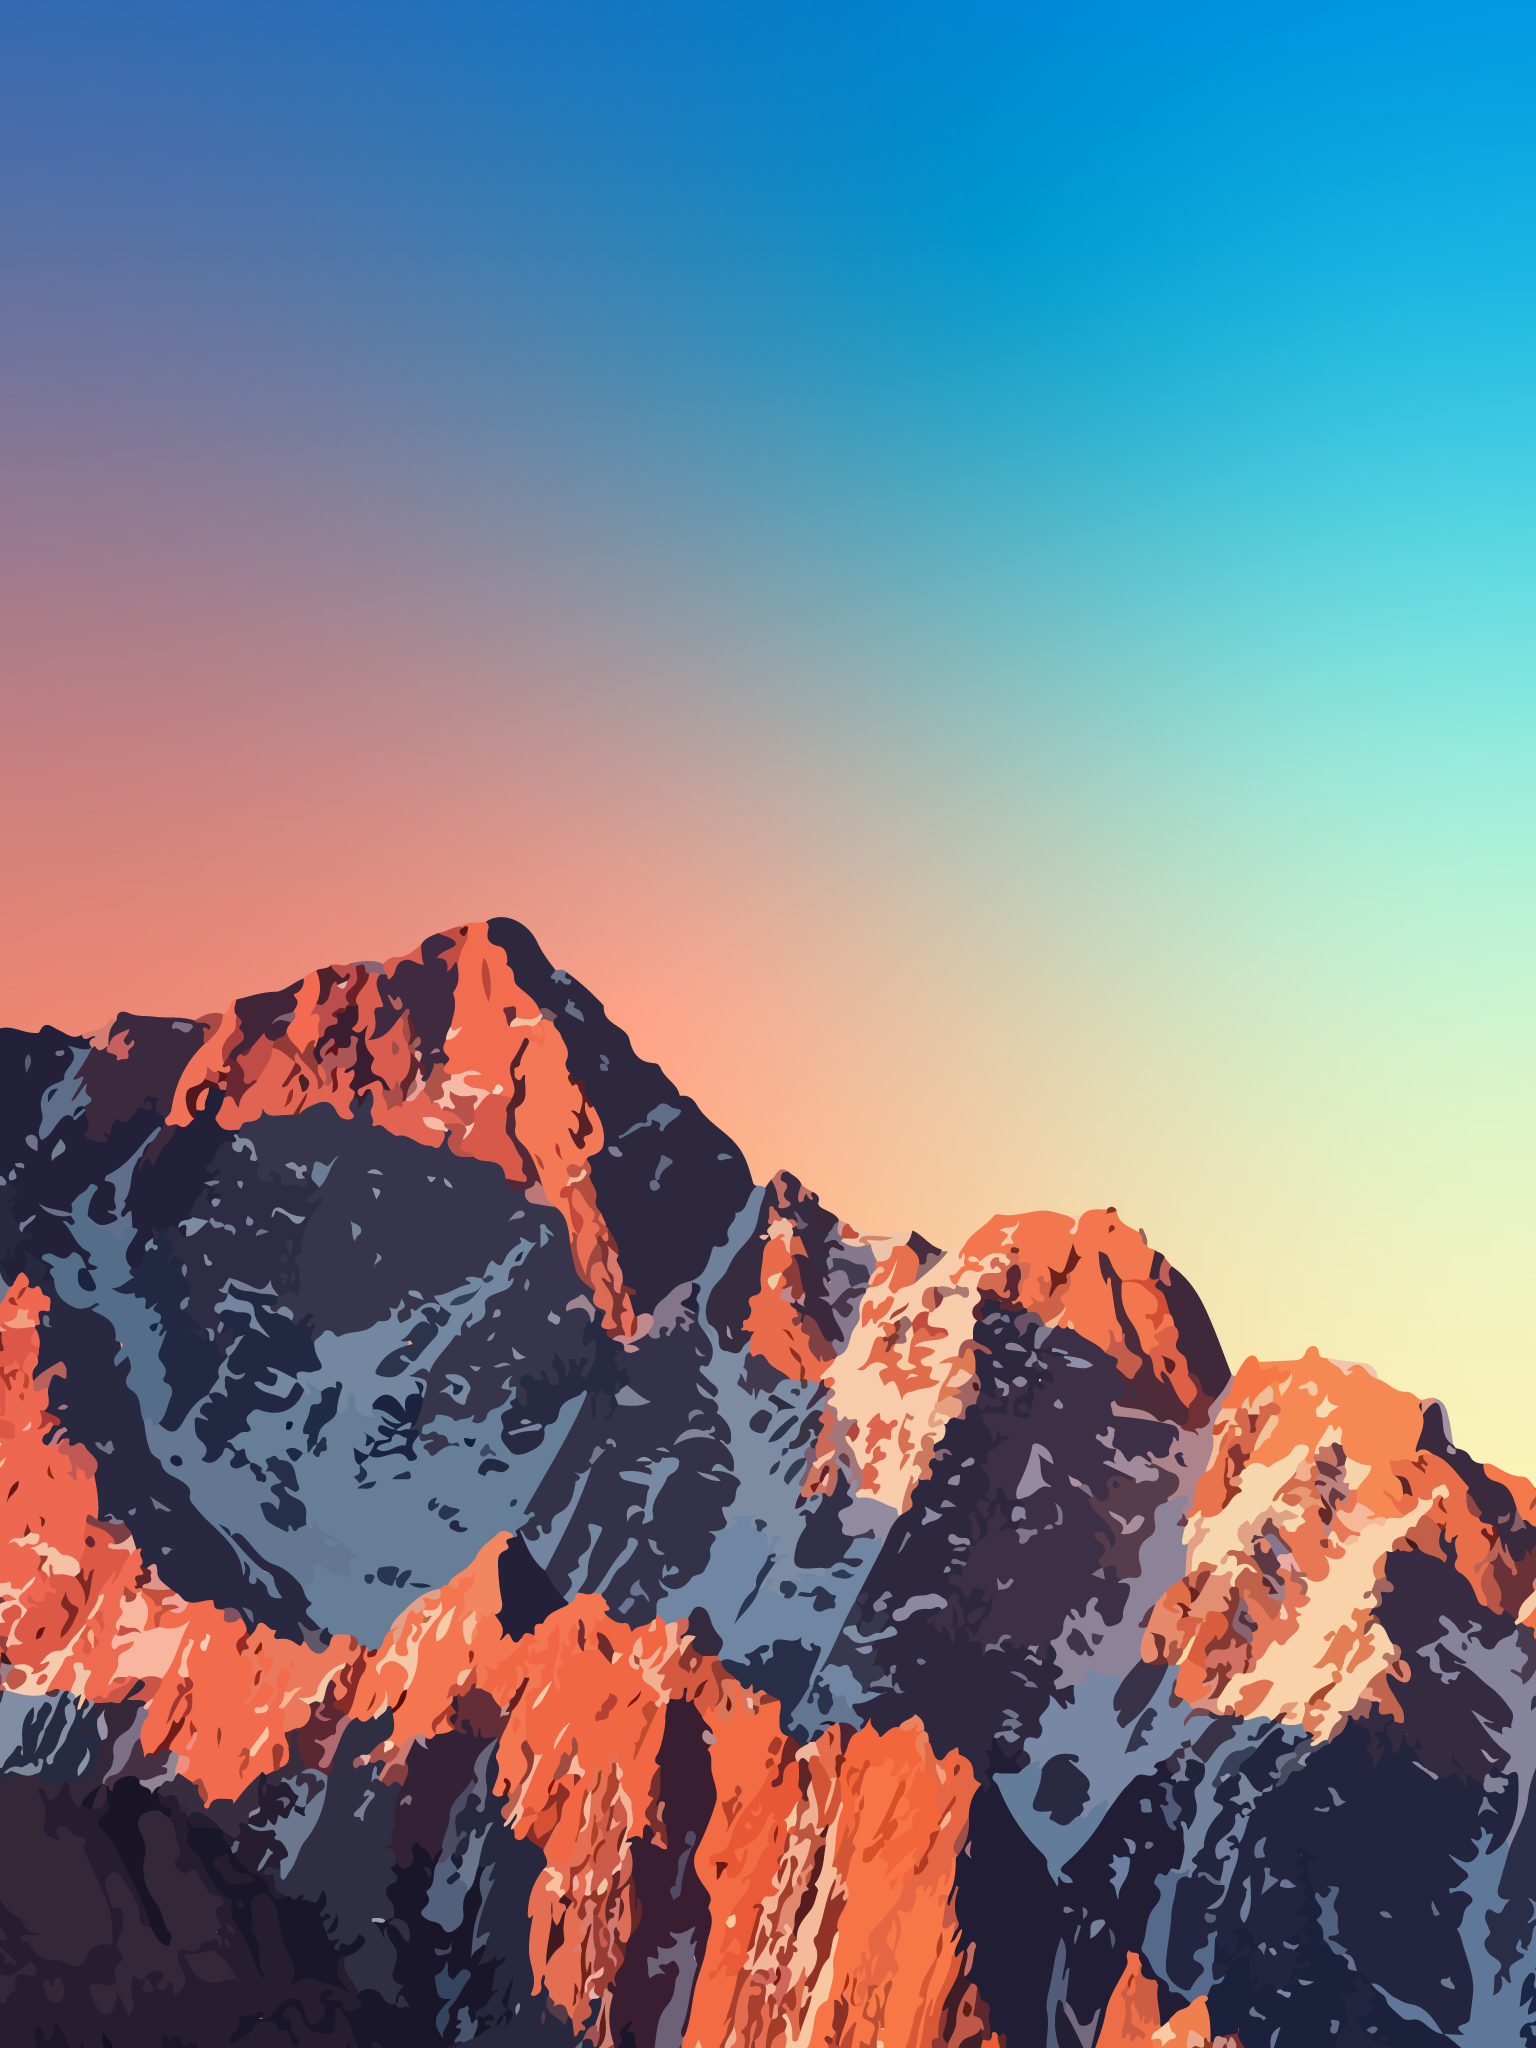 Background wallpaper for ipad pro - landscape mountain